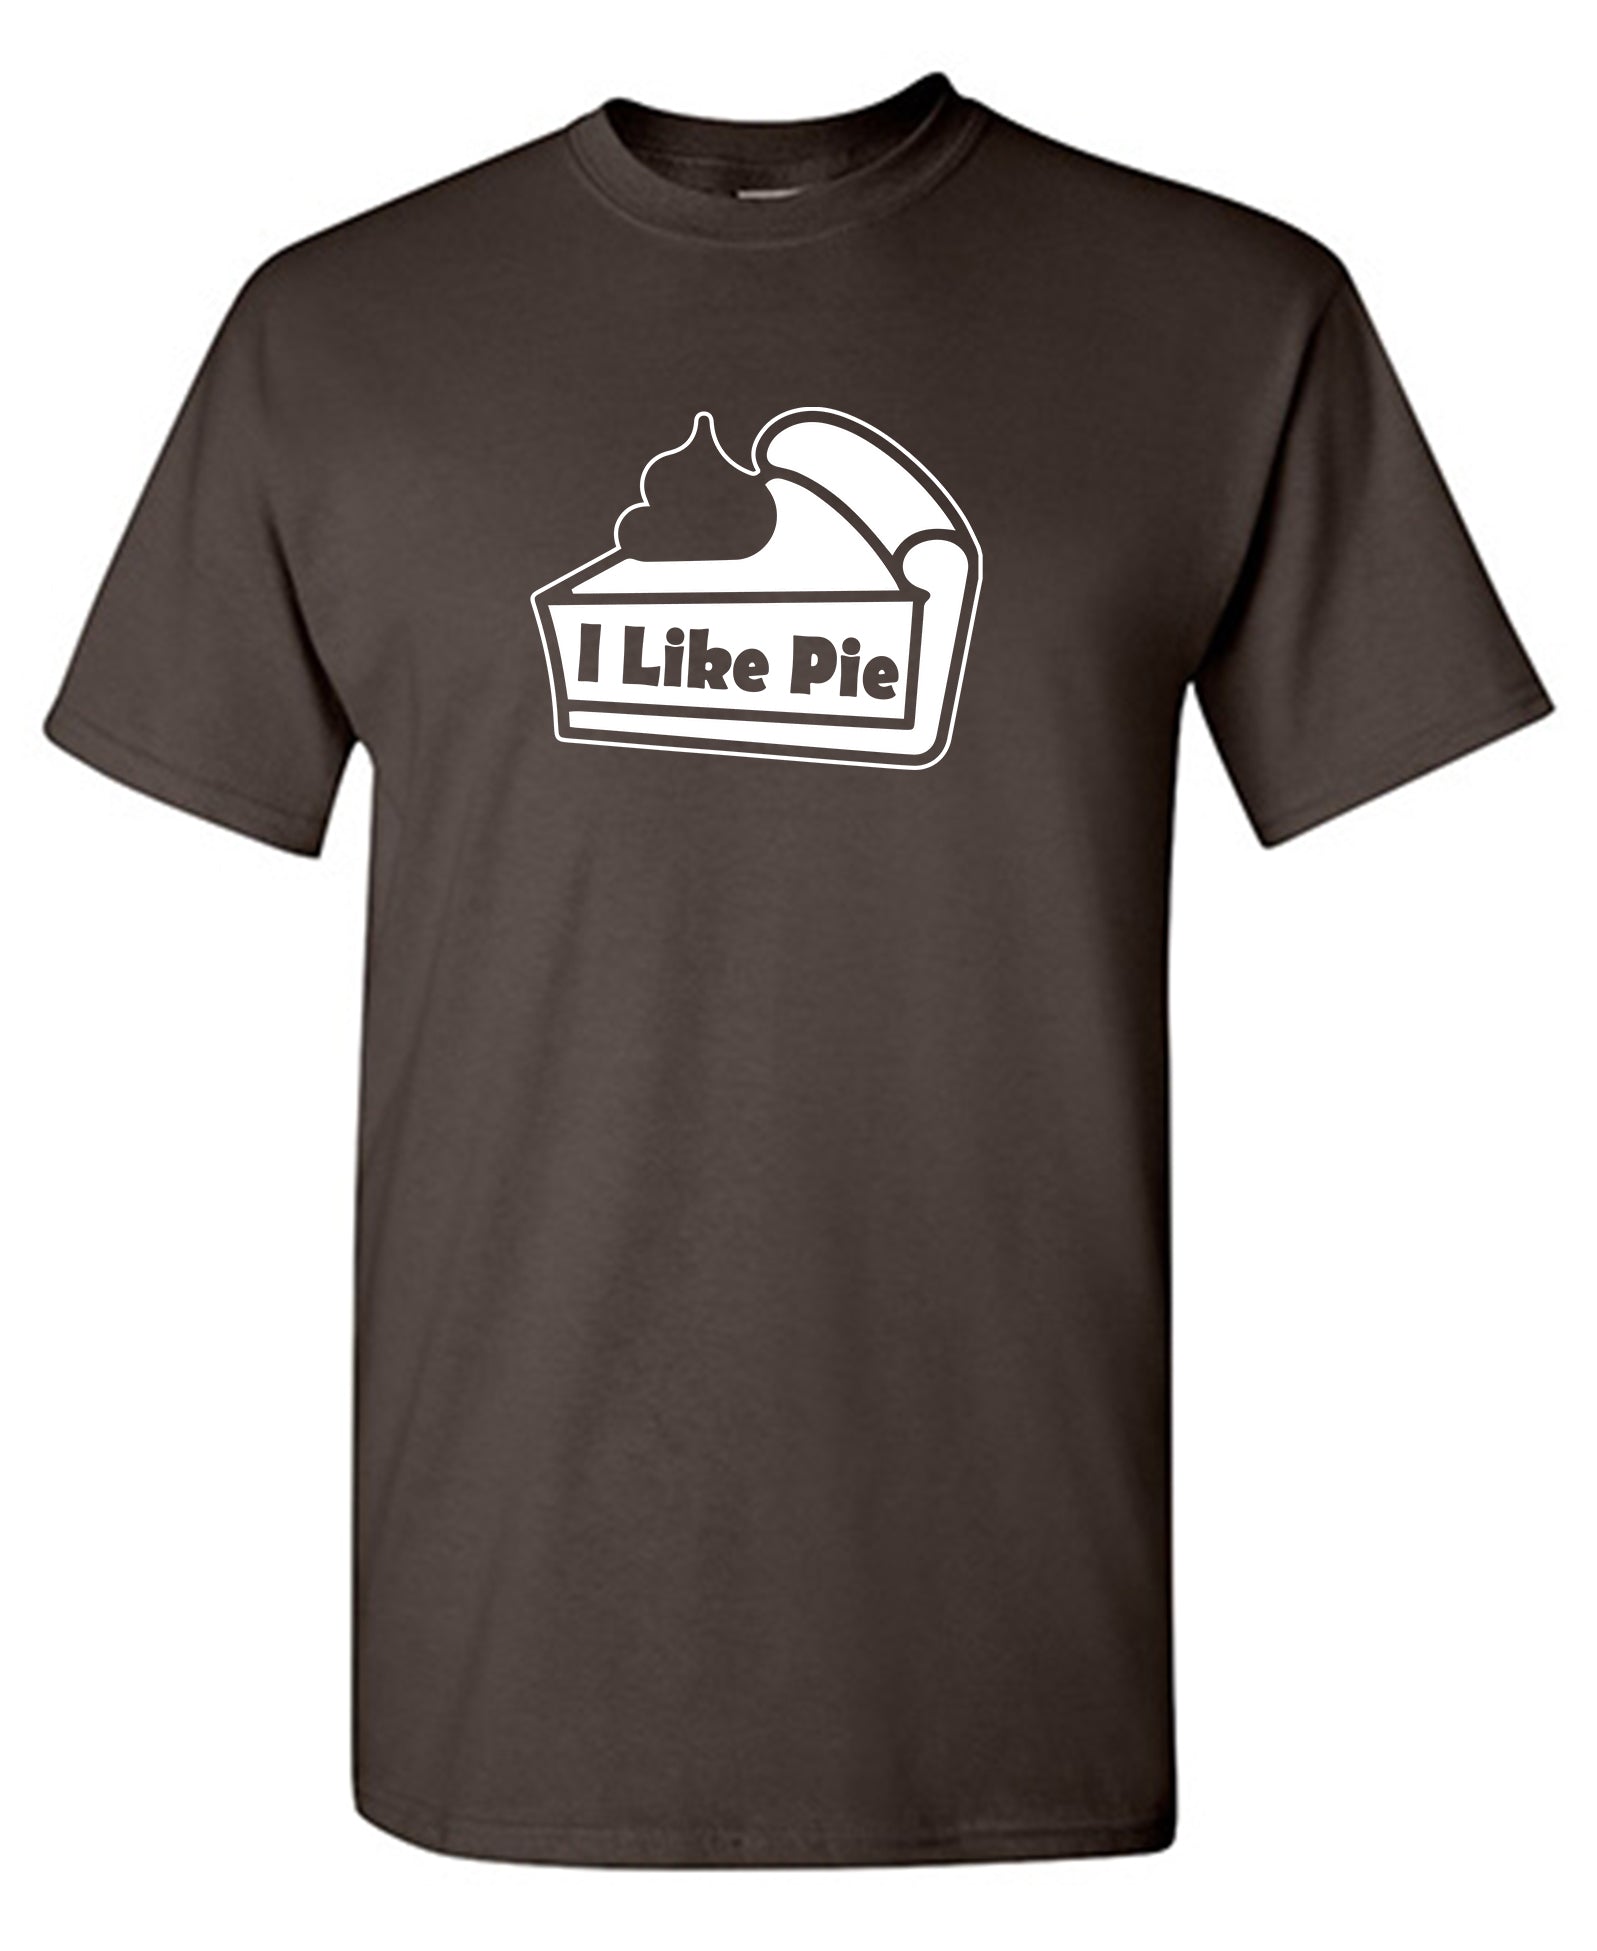 I Like Pie - Funny T Shirts & Graphic Tees